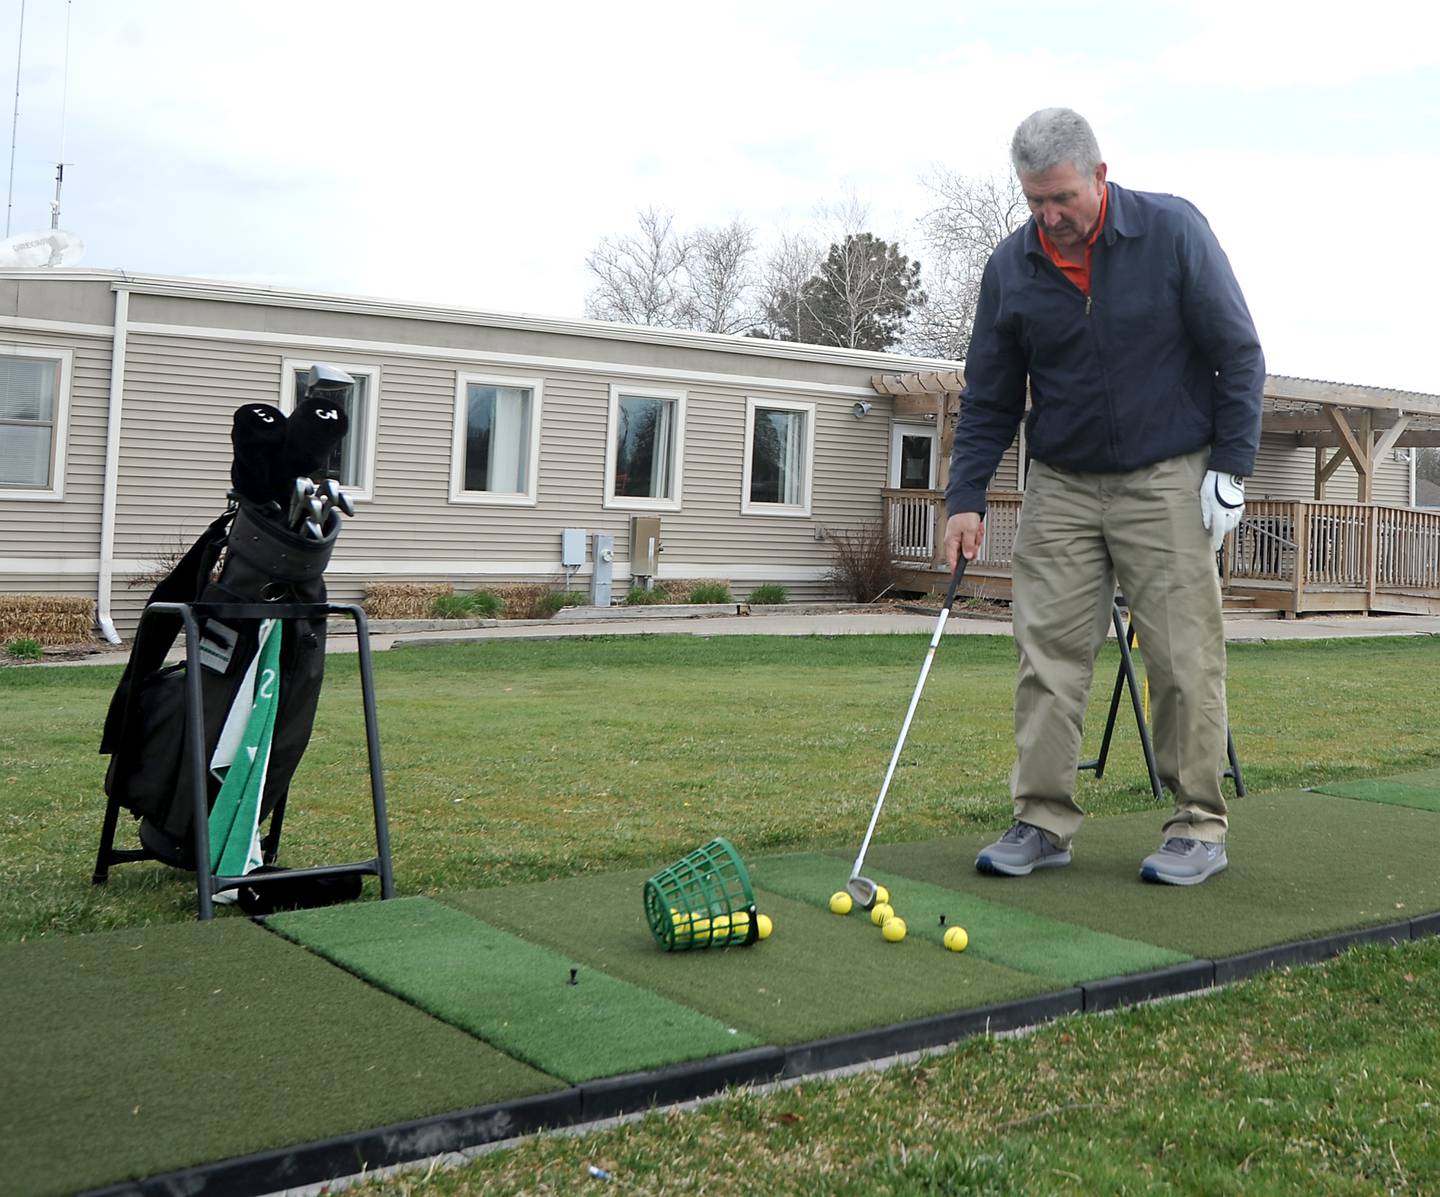 John Streit hits golf ball Wednesday, April 27, 2022, at the driving range at RedTail Golf Club, 7900 Redtail Drive in the Village of Lakewood. The golf club will be building a new clubhouse later this year